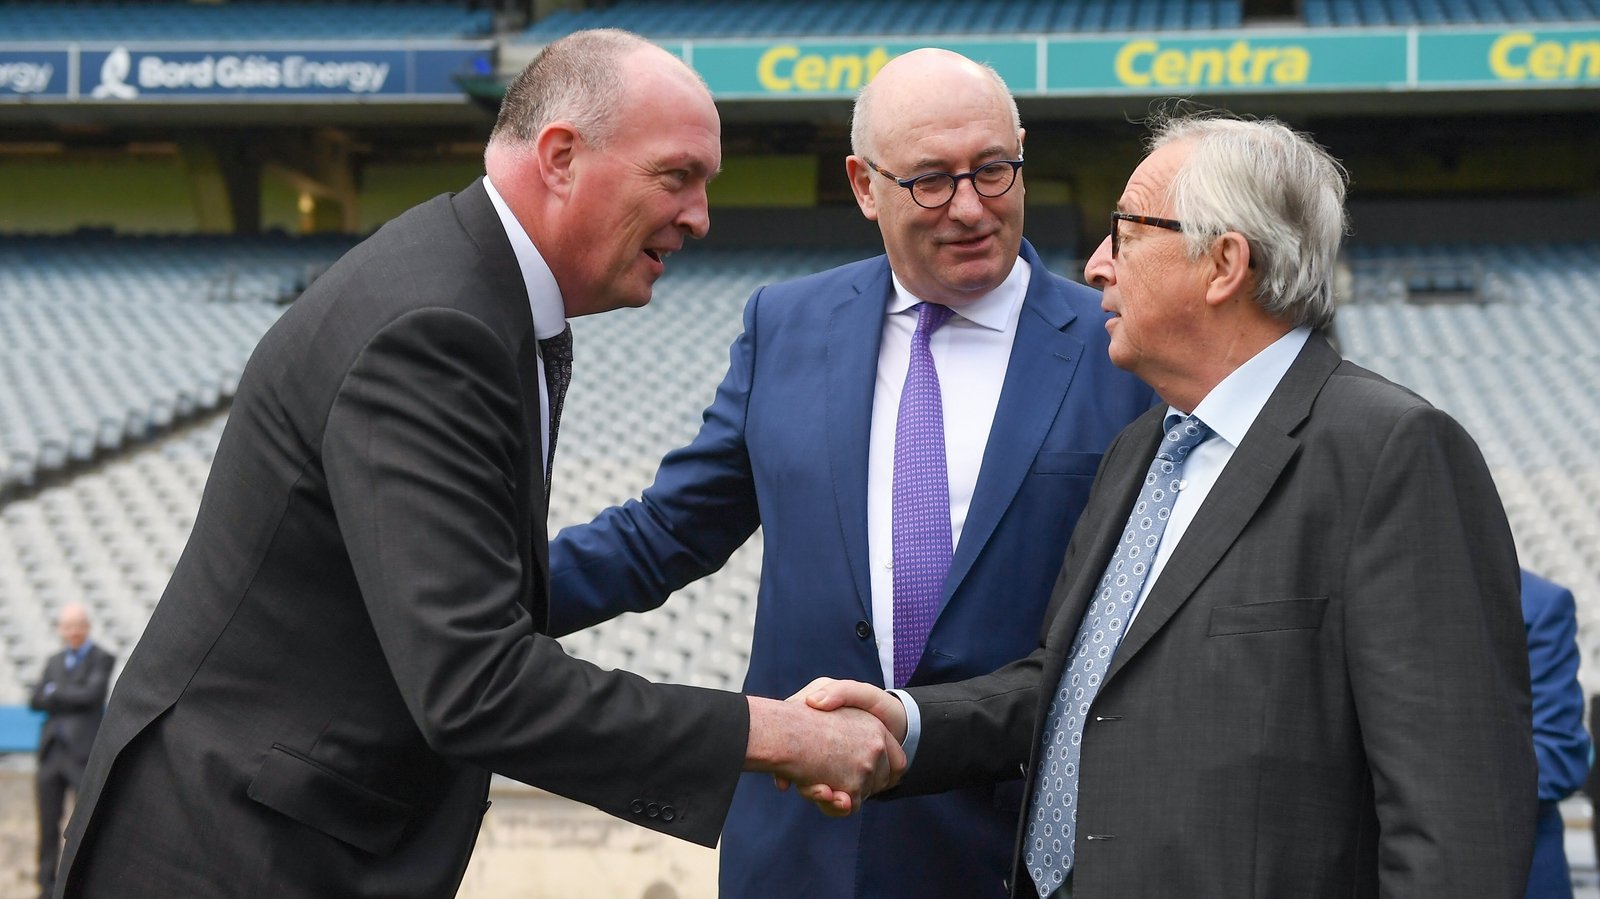 Image - Gilroy meets President of the European Commission Jean-Claude Juncker (R) at Croke Park in 2018